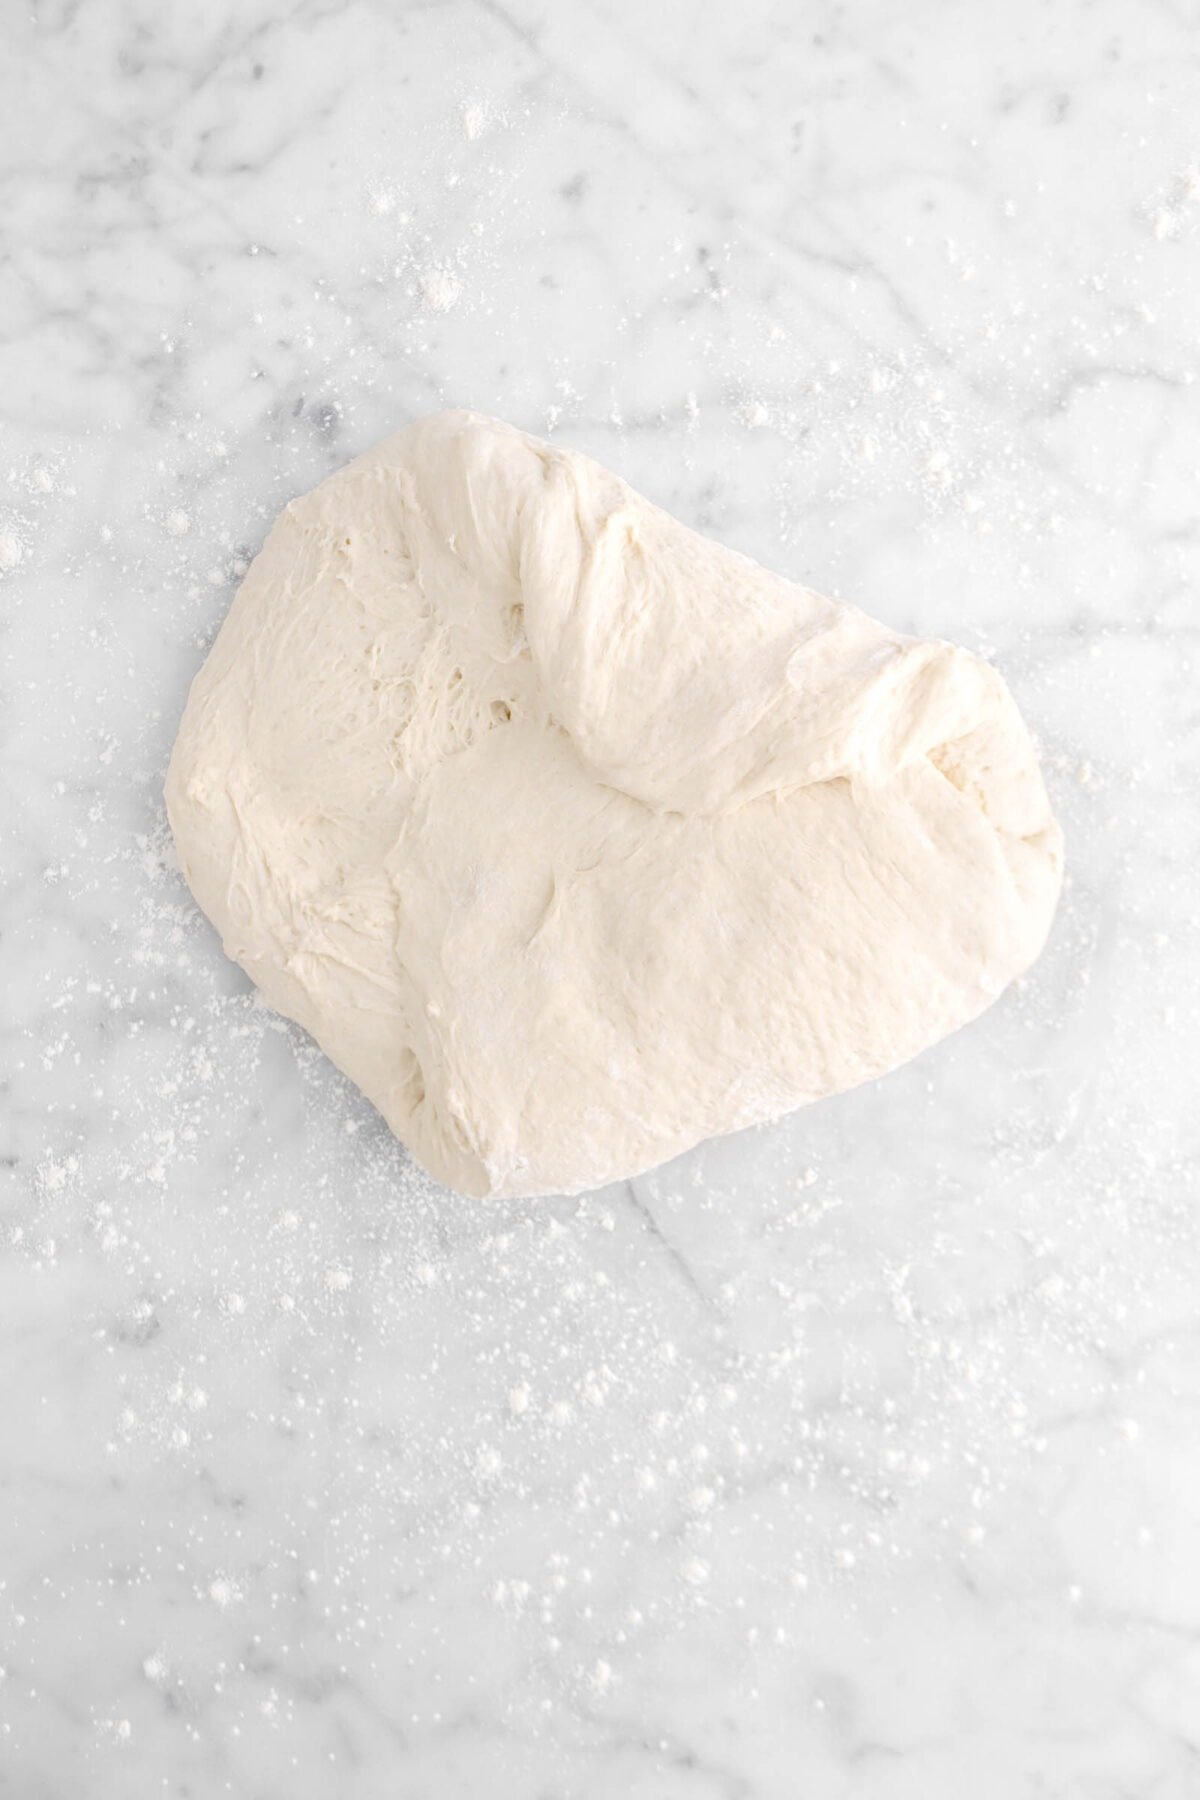 top right of dough folded inwards